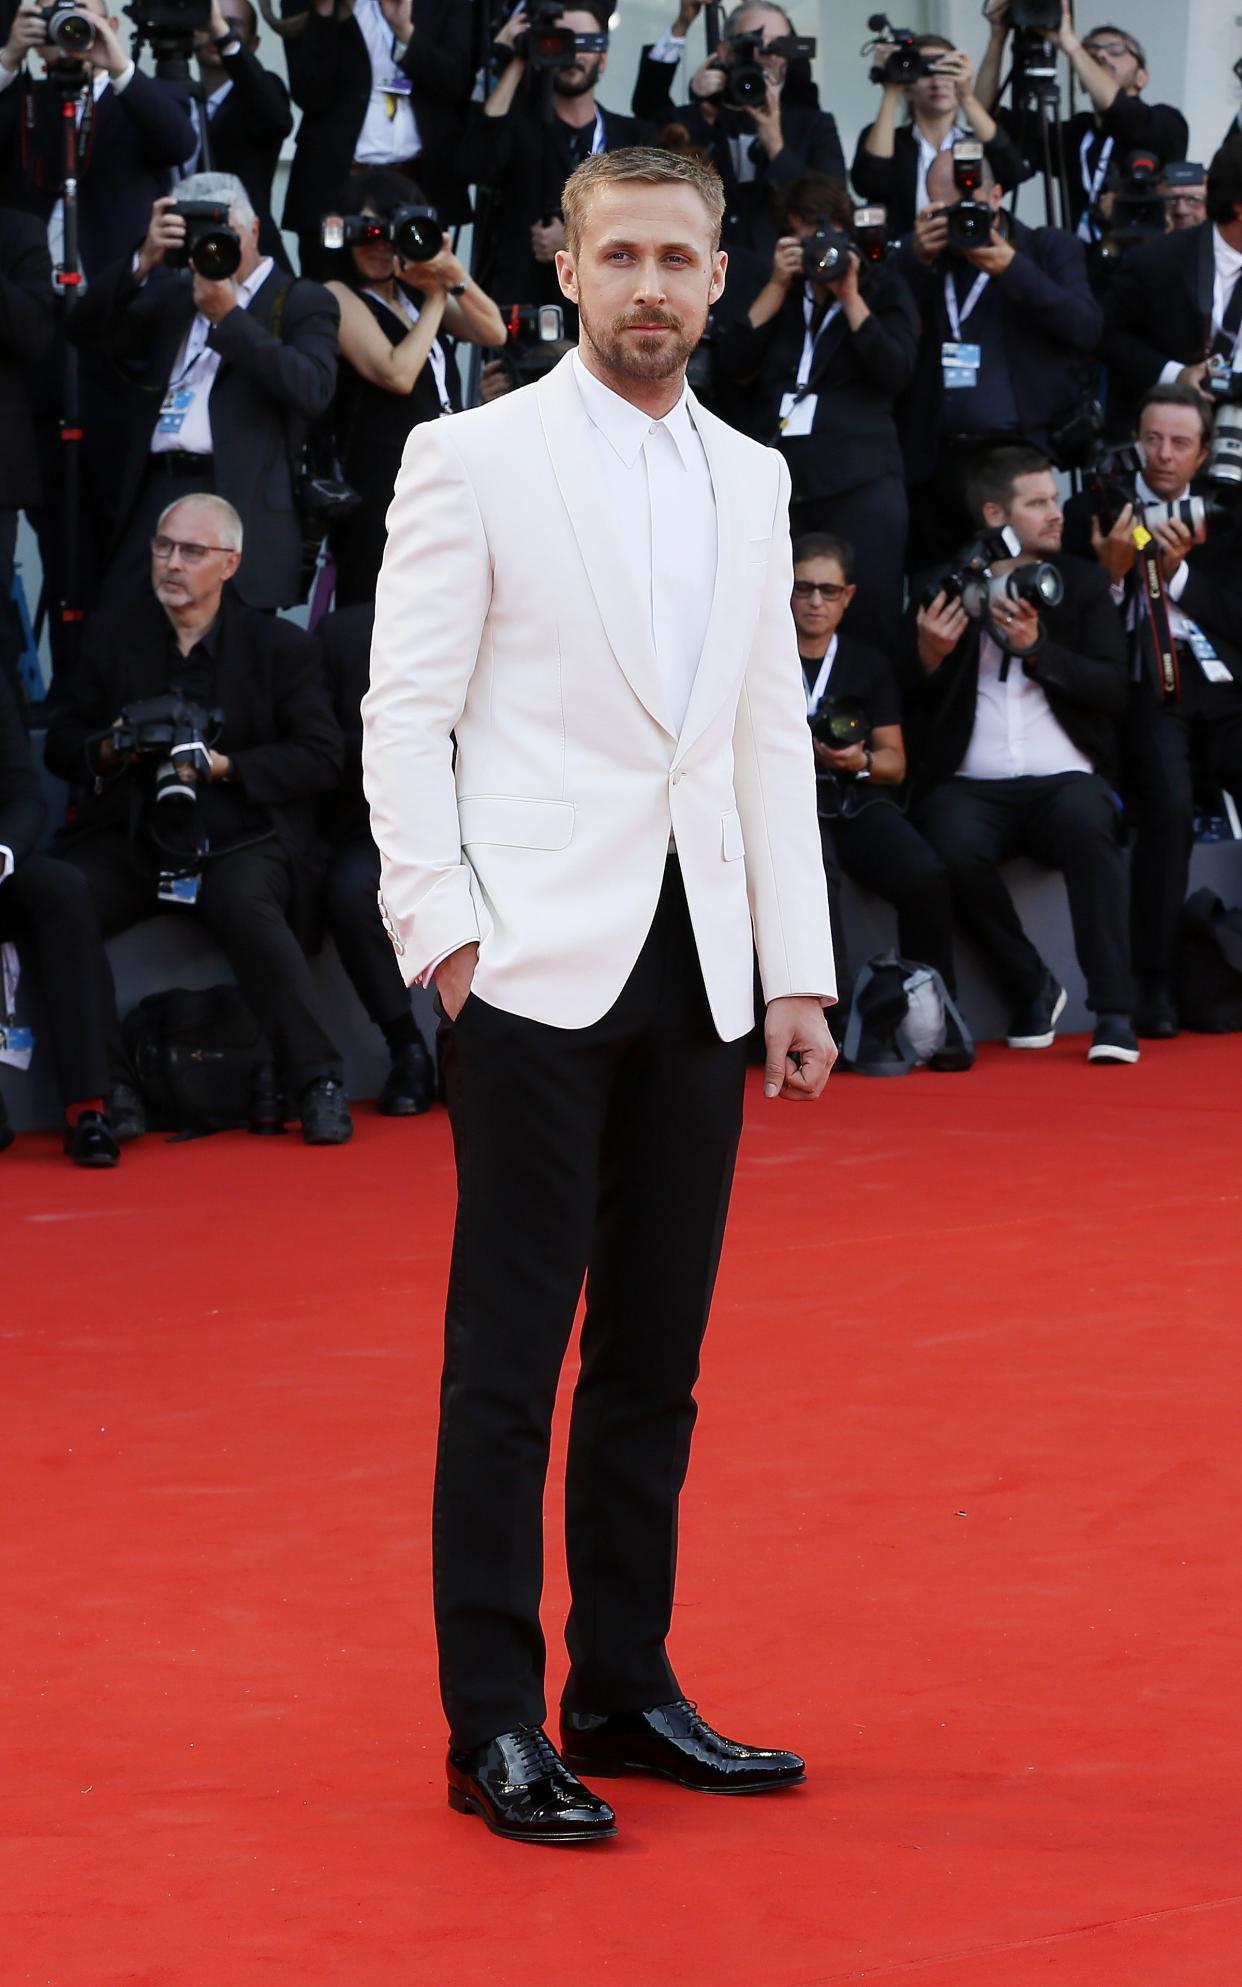 Ryan Gosling at the First Man premiere wearing pristine white and a shirt without a tie - 2018 Ernesto Ruscio